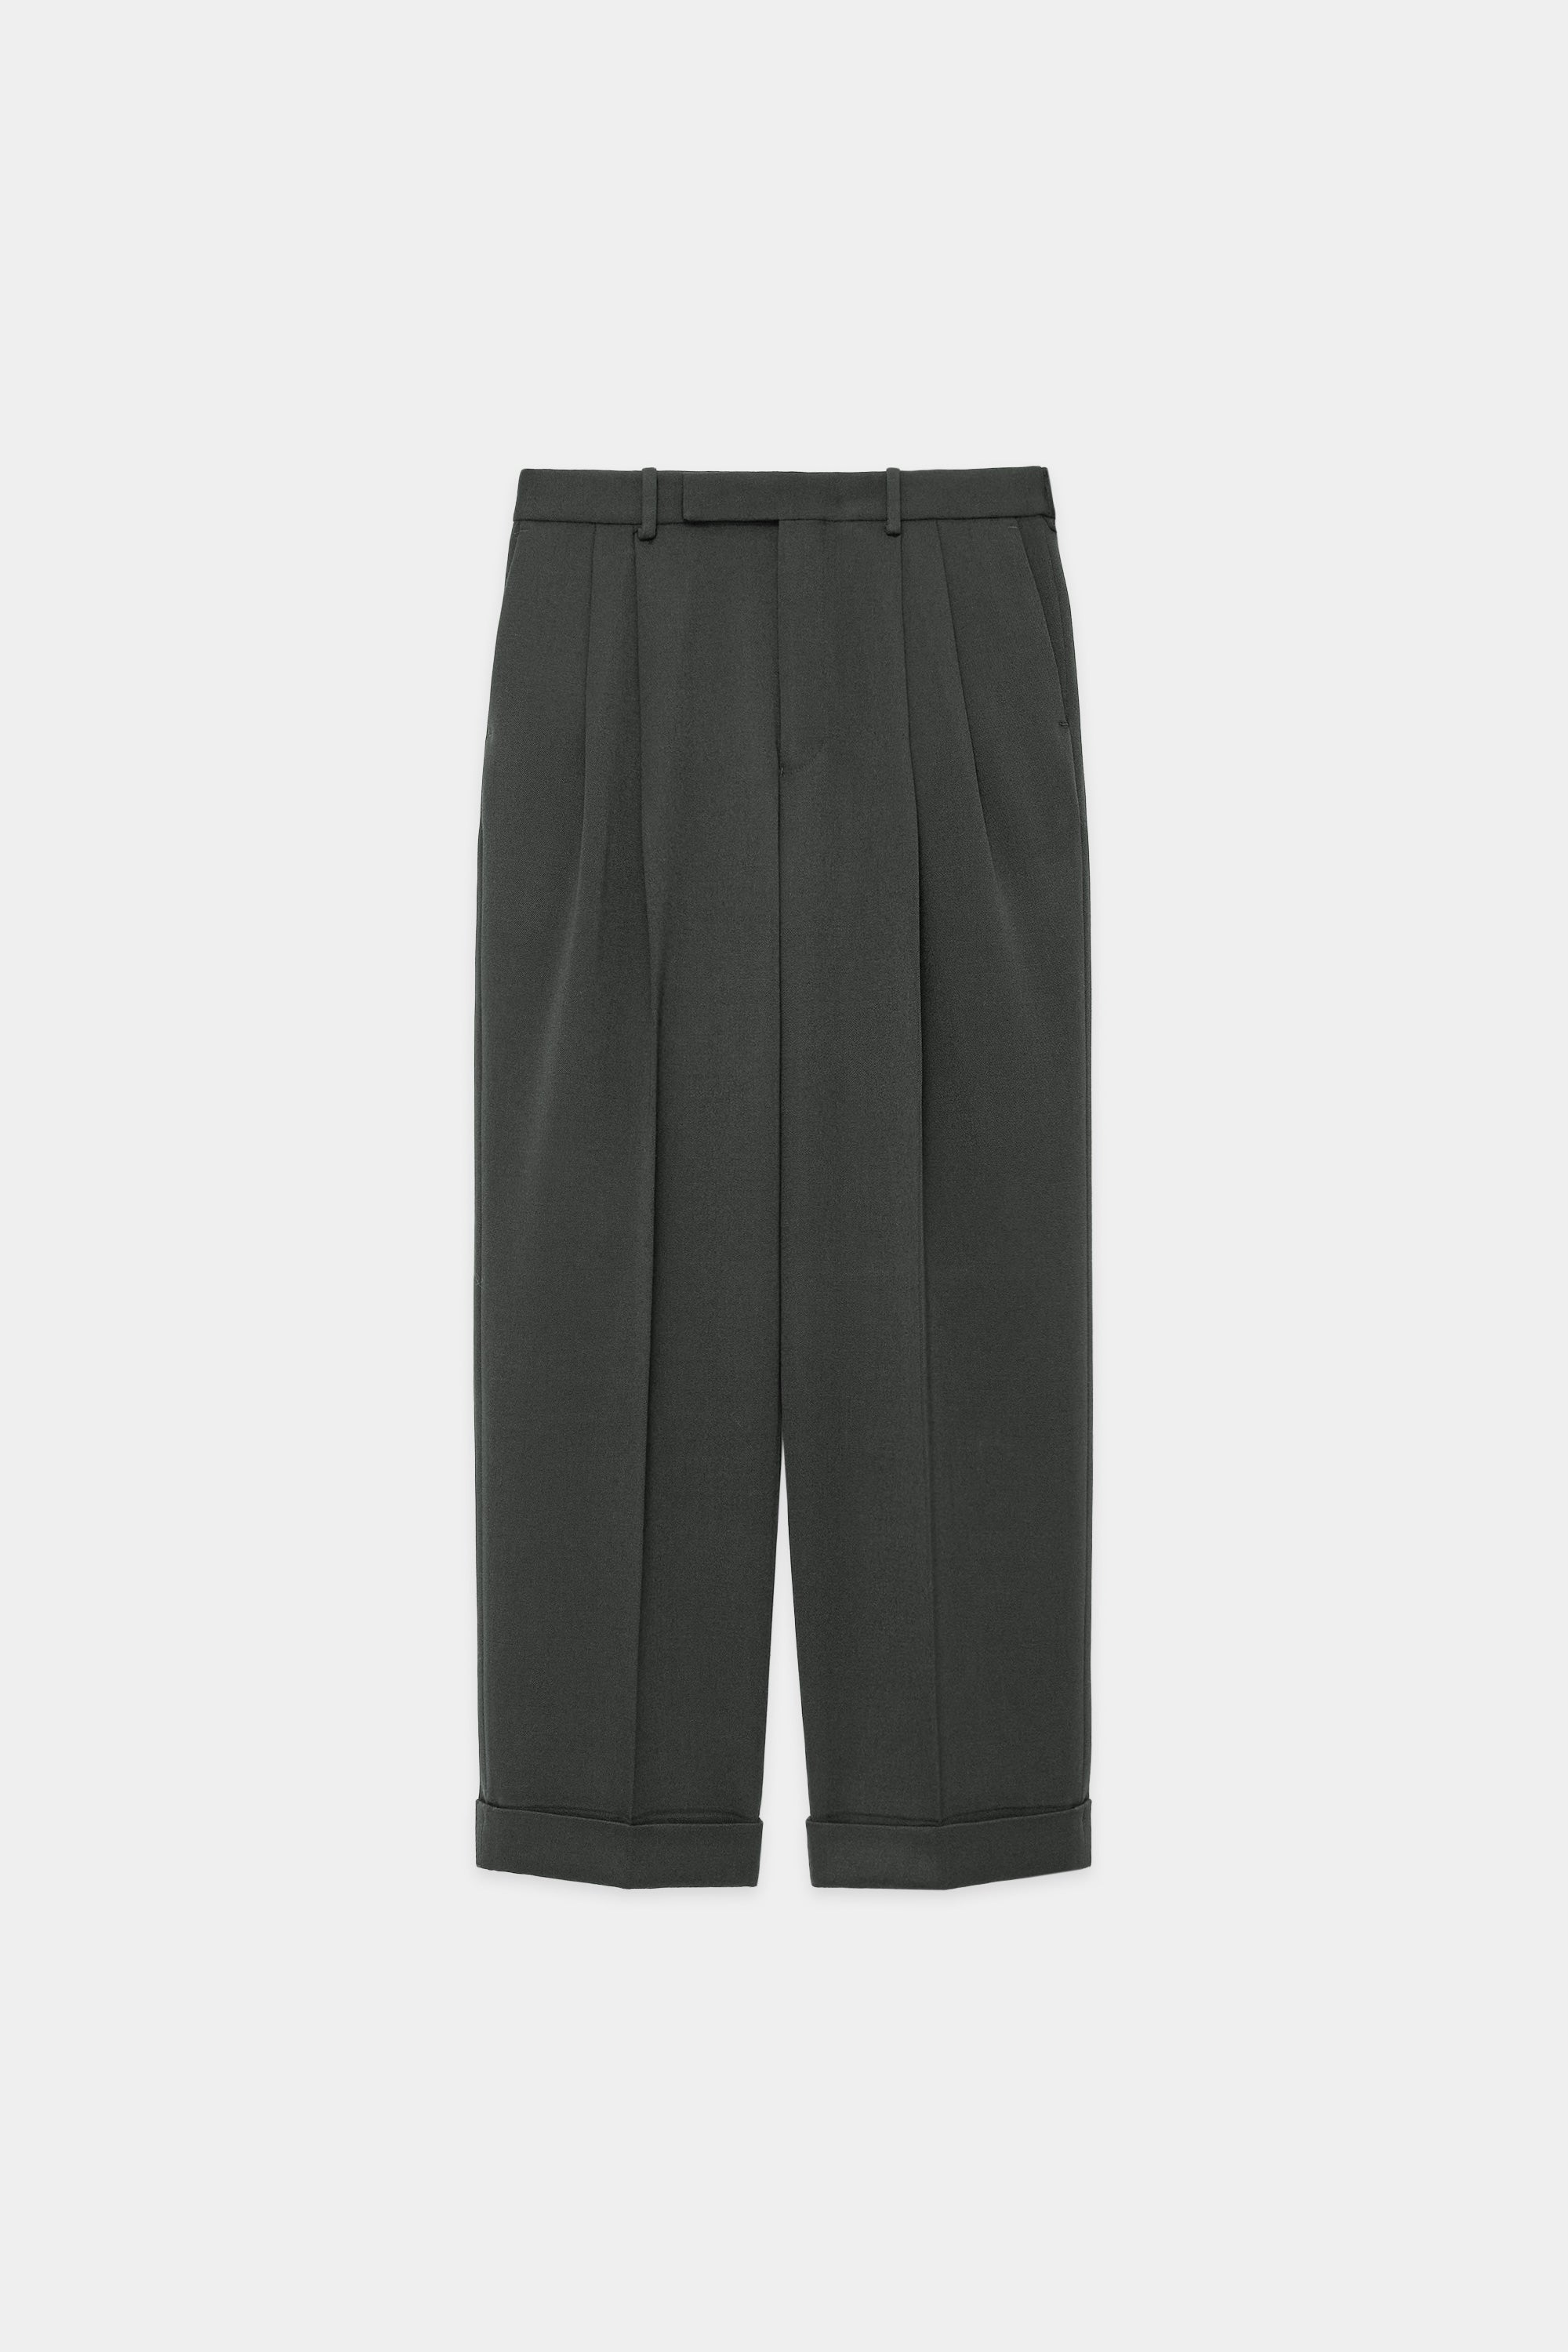 ORGANIC WOOL TAXEED CLOTH DOUBLE PLEATED CLASSIC WIDE TROUSERS, Blue Gray